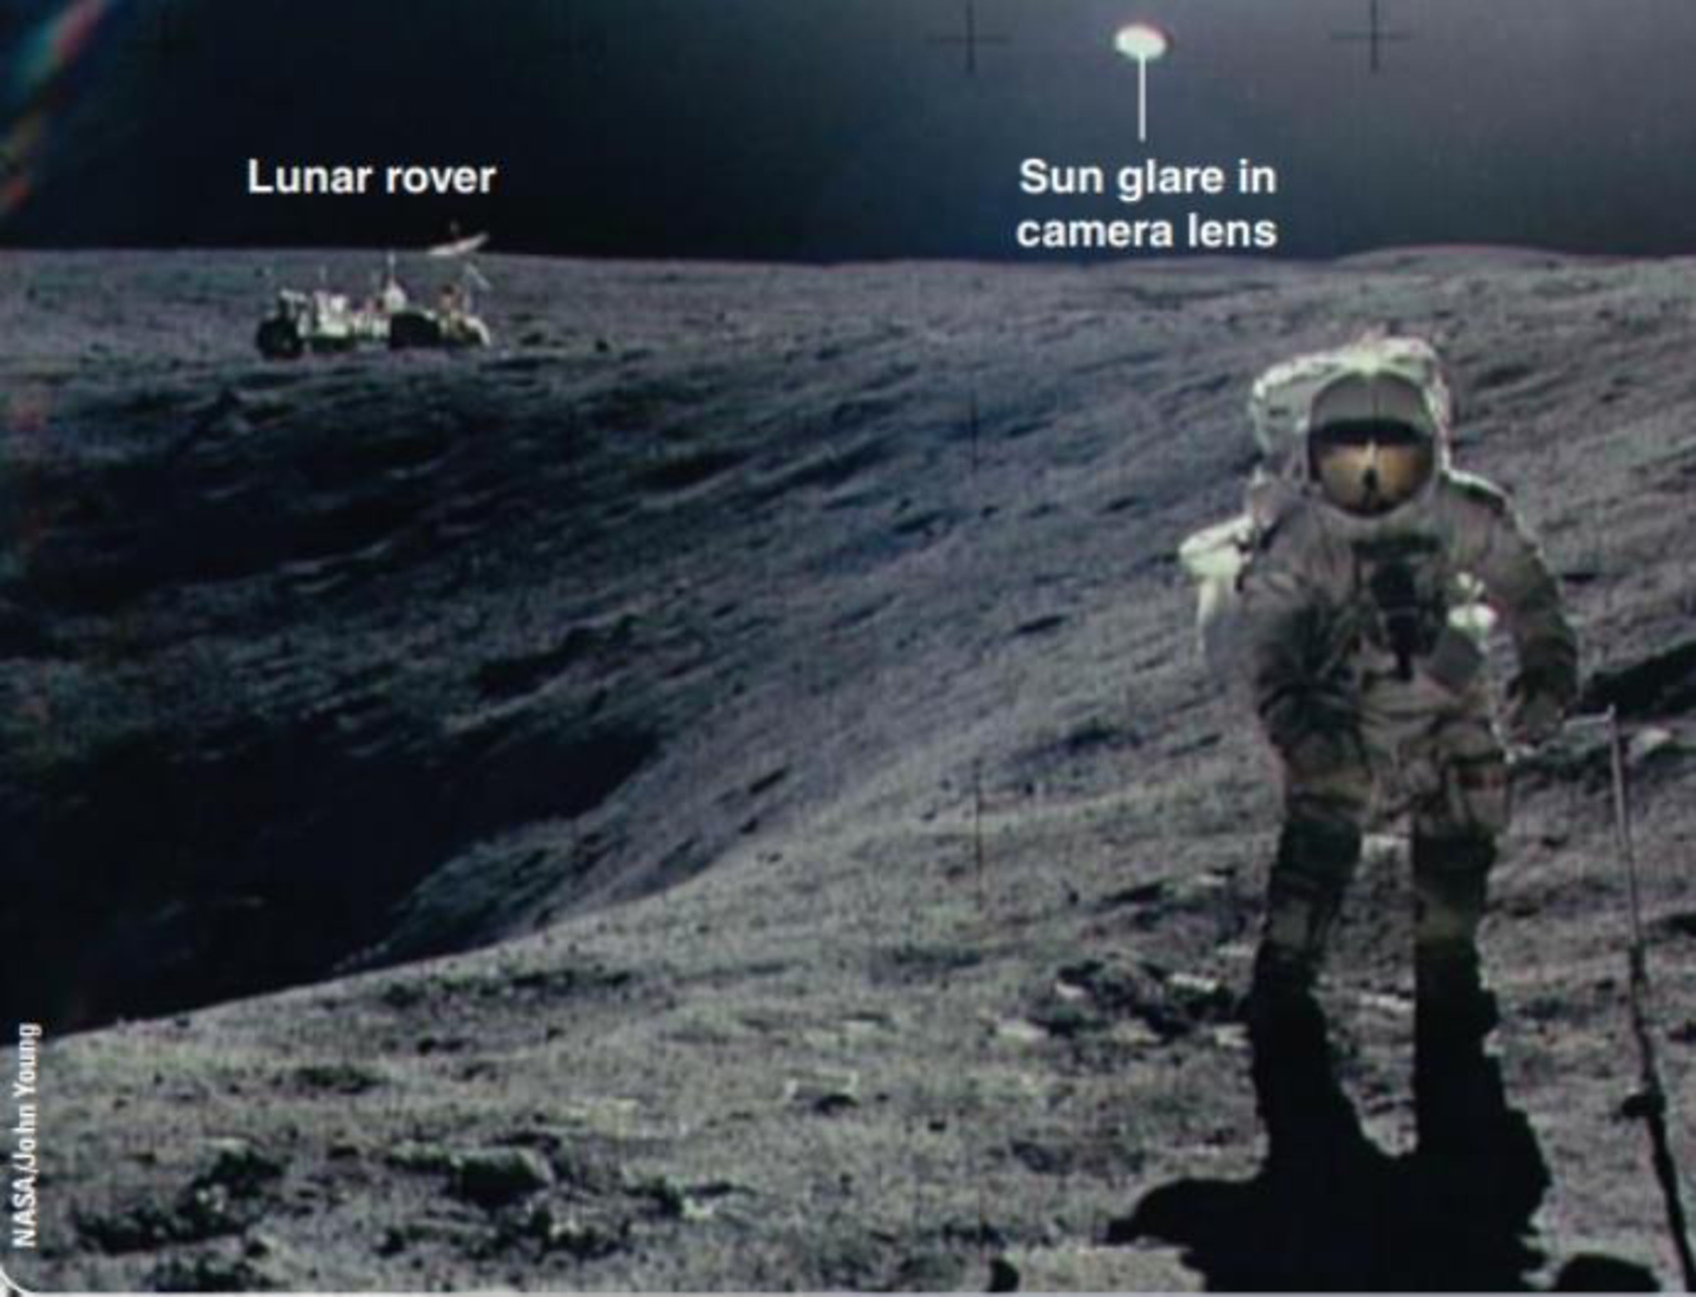 Chapter 21, Problem 1LTL, Look at the image of the astronaut on the Moon at the upper right of the right-hand page of the 